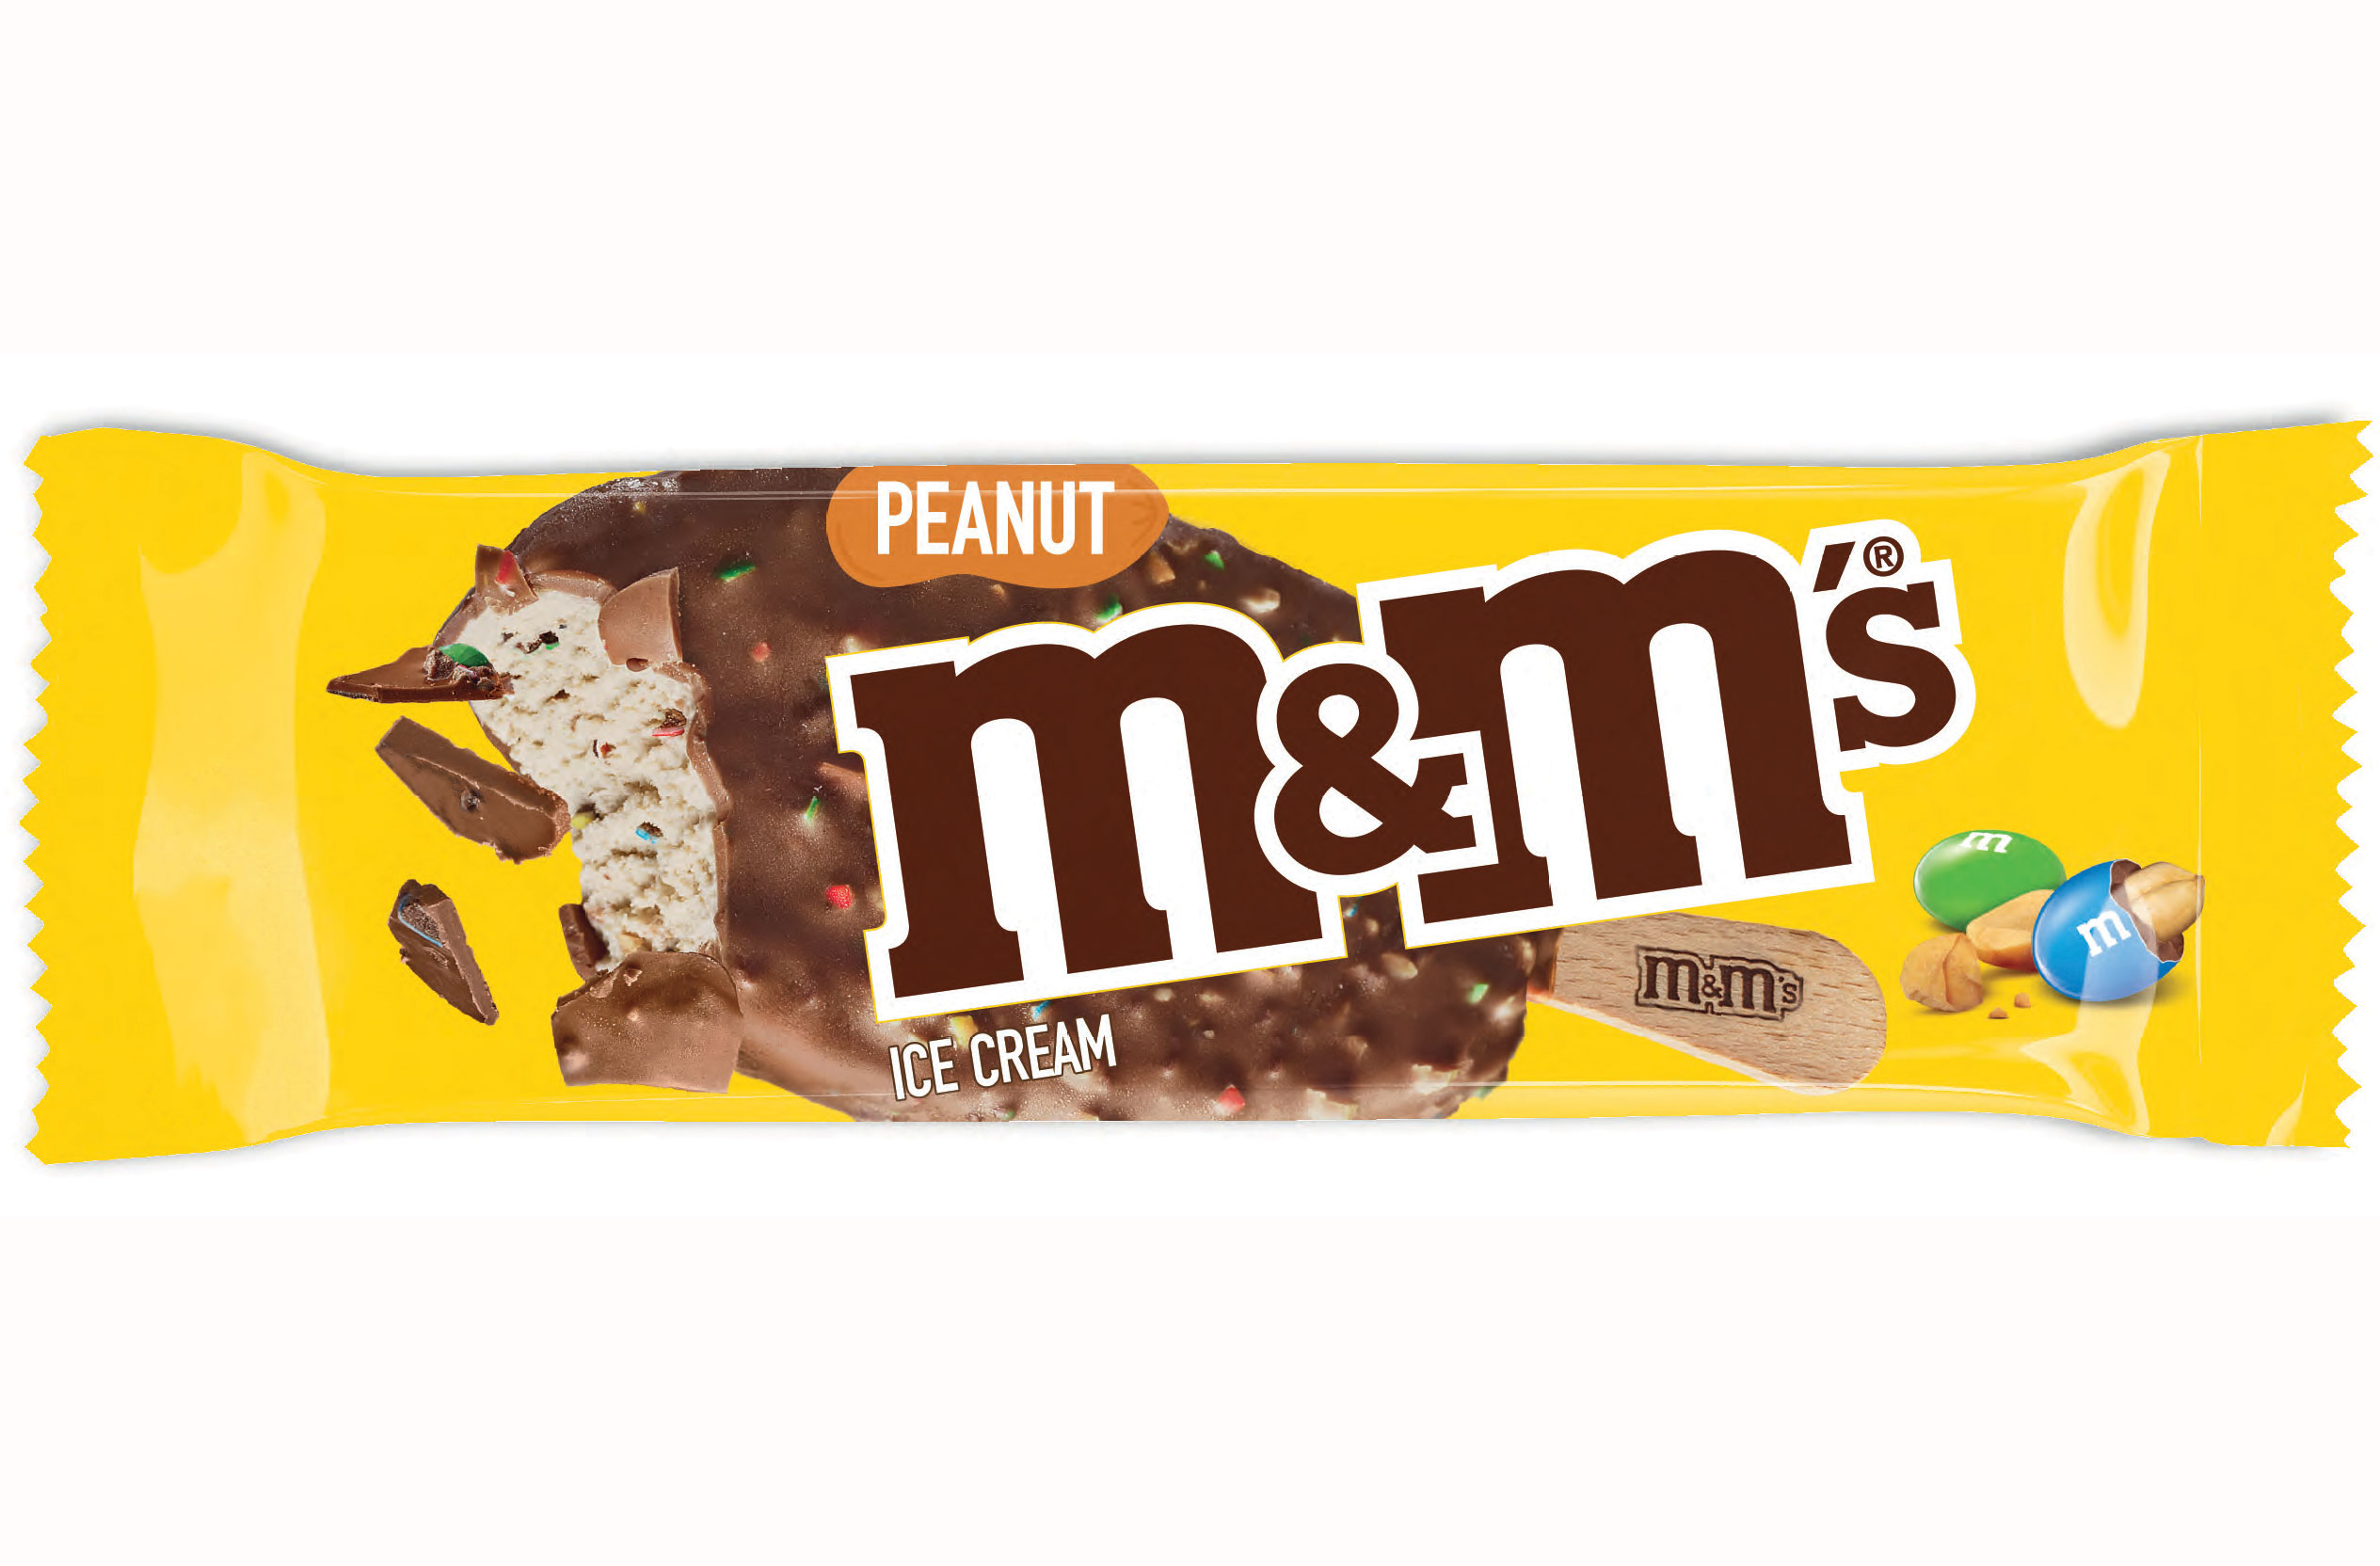 Mini m&m's ice cream! Peanut flavor! Saw this in the store. Would you